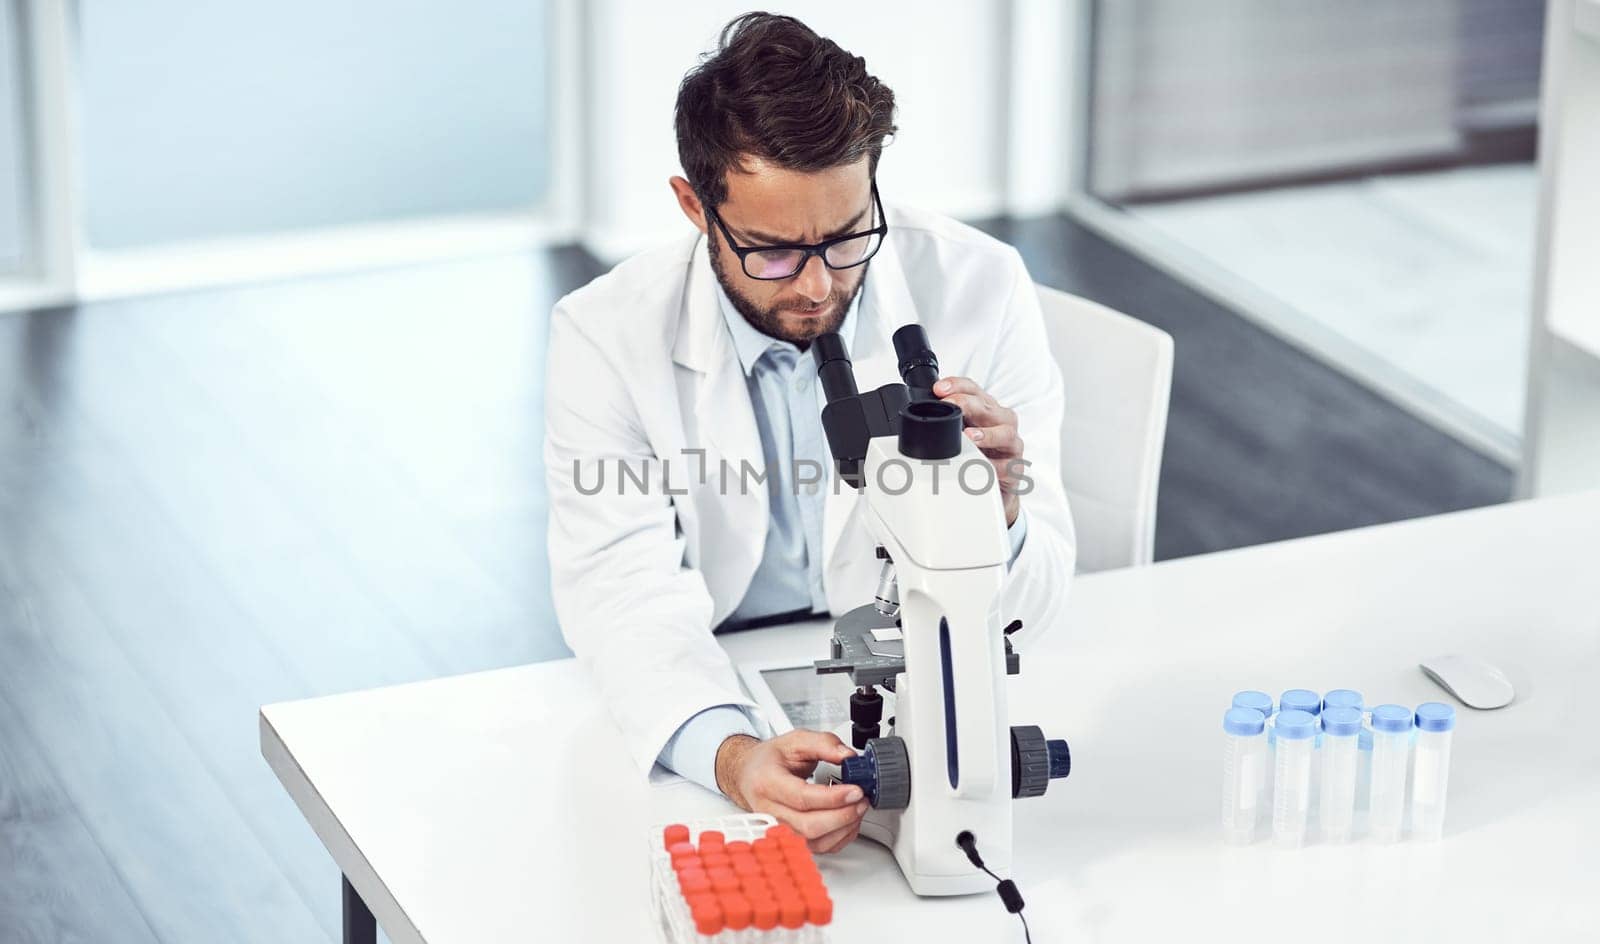 That looks pretty peculiar. a focused young male scientist looking through a microscope inside of a laboratory